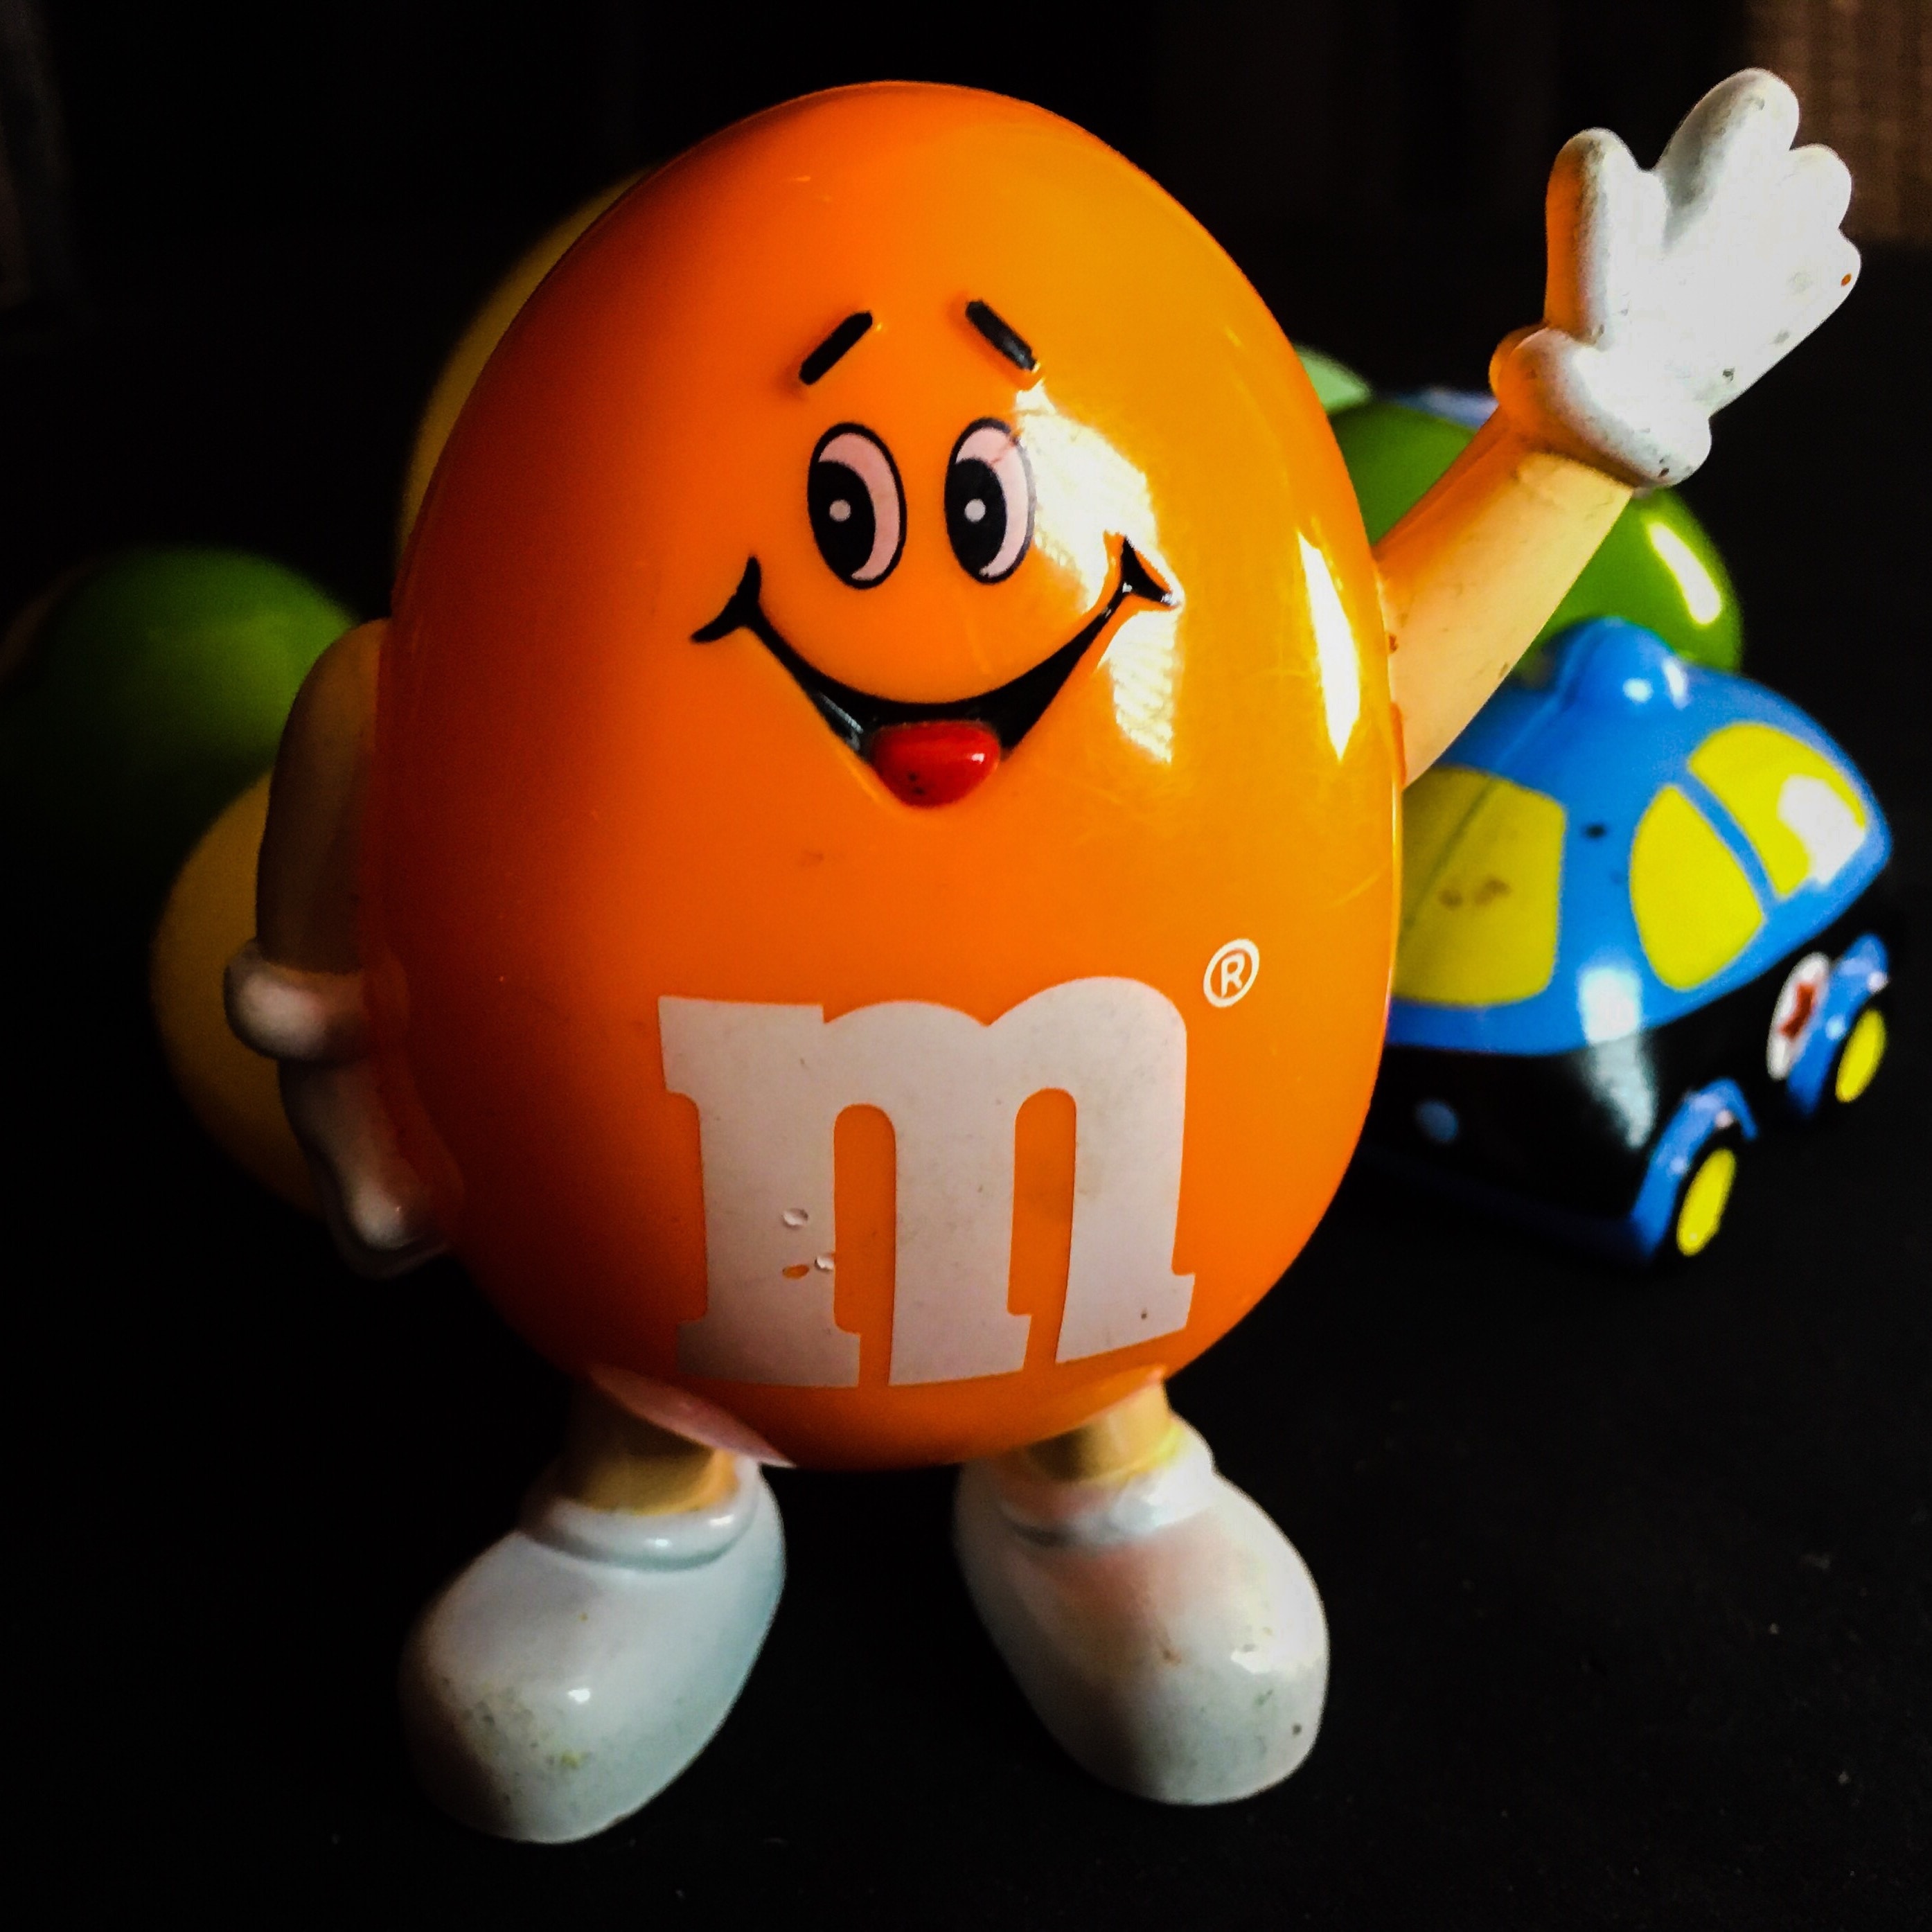 Mm, Easter, Candy, Fun, Toy, Childhood, orange color, halloween